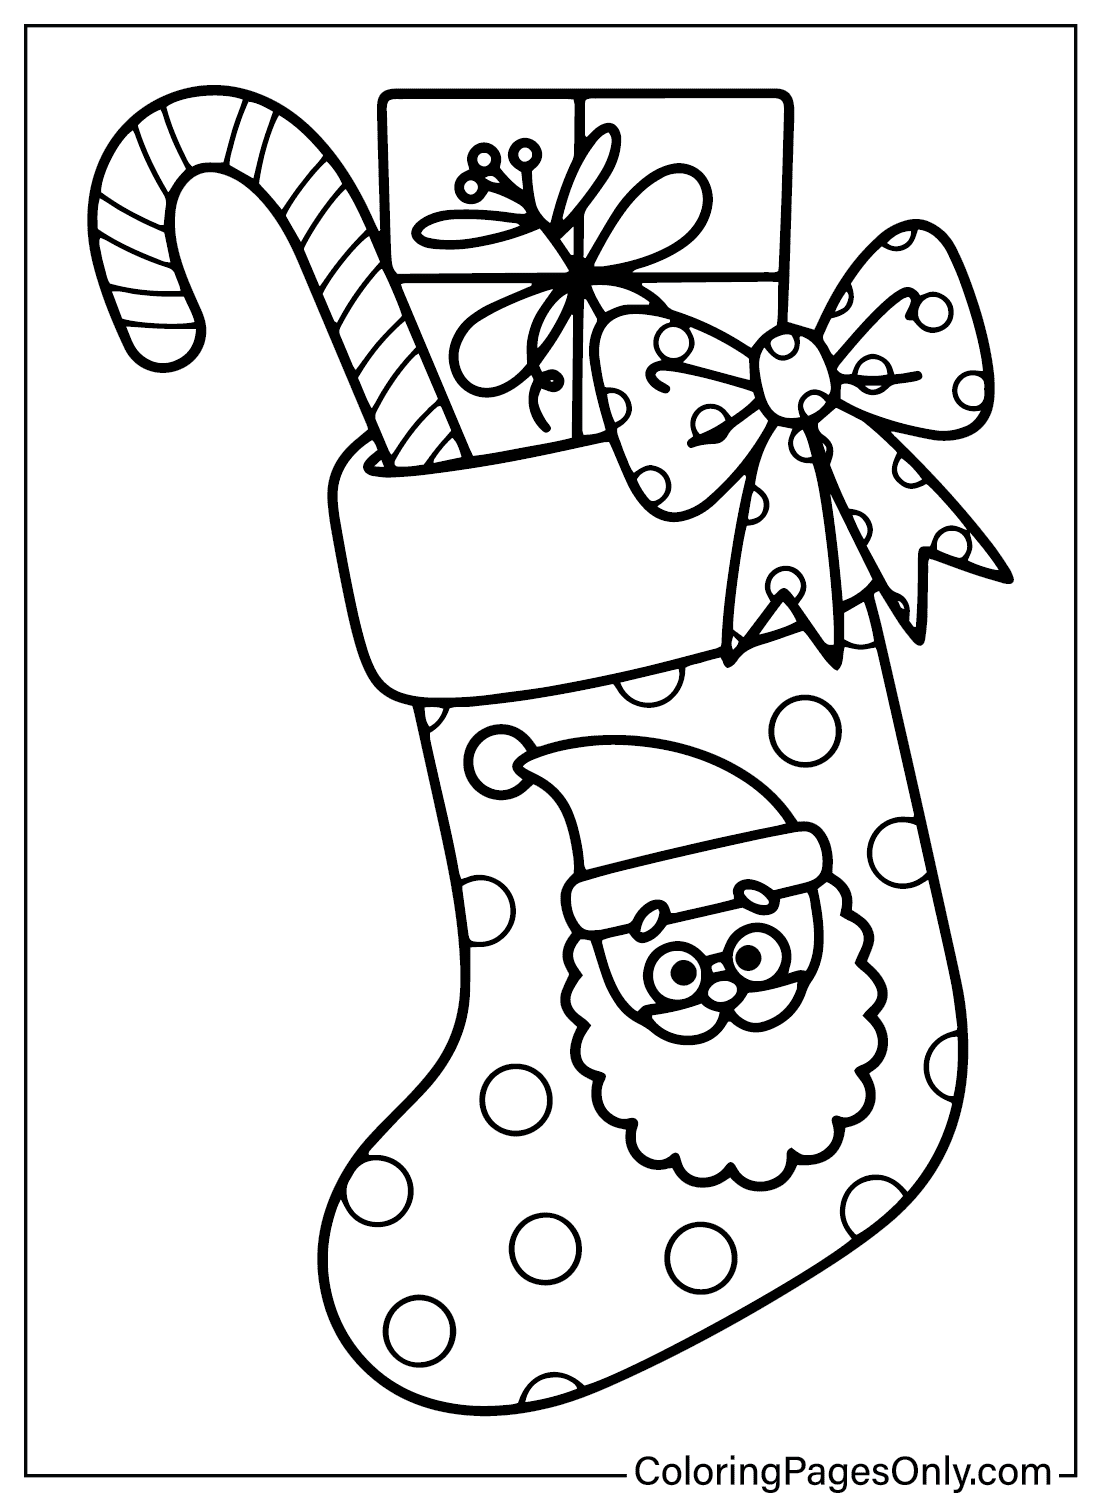 Christmas Stockings Coloring Page Free from Christmas Stockings